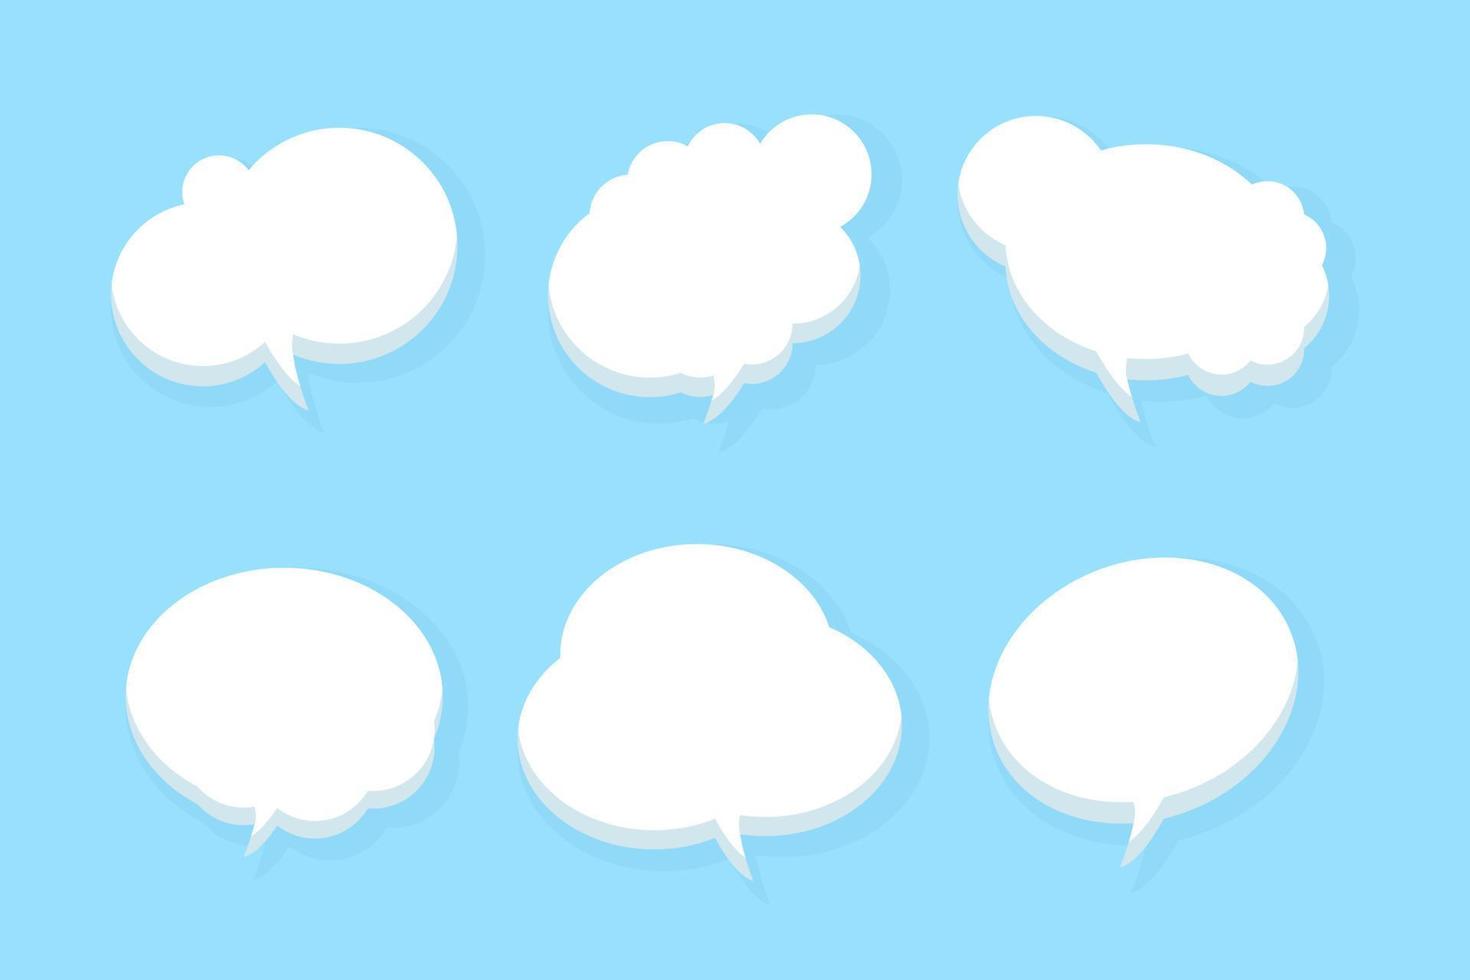 Blue speech bubble chat icon collection vector